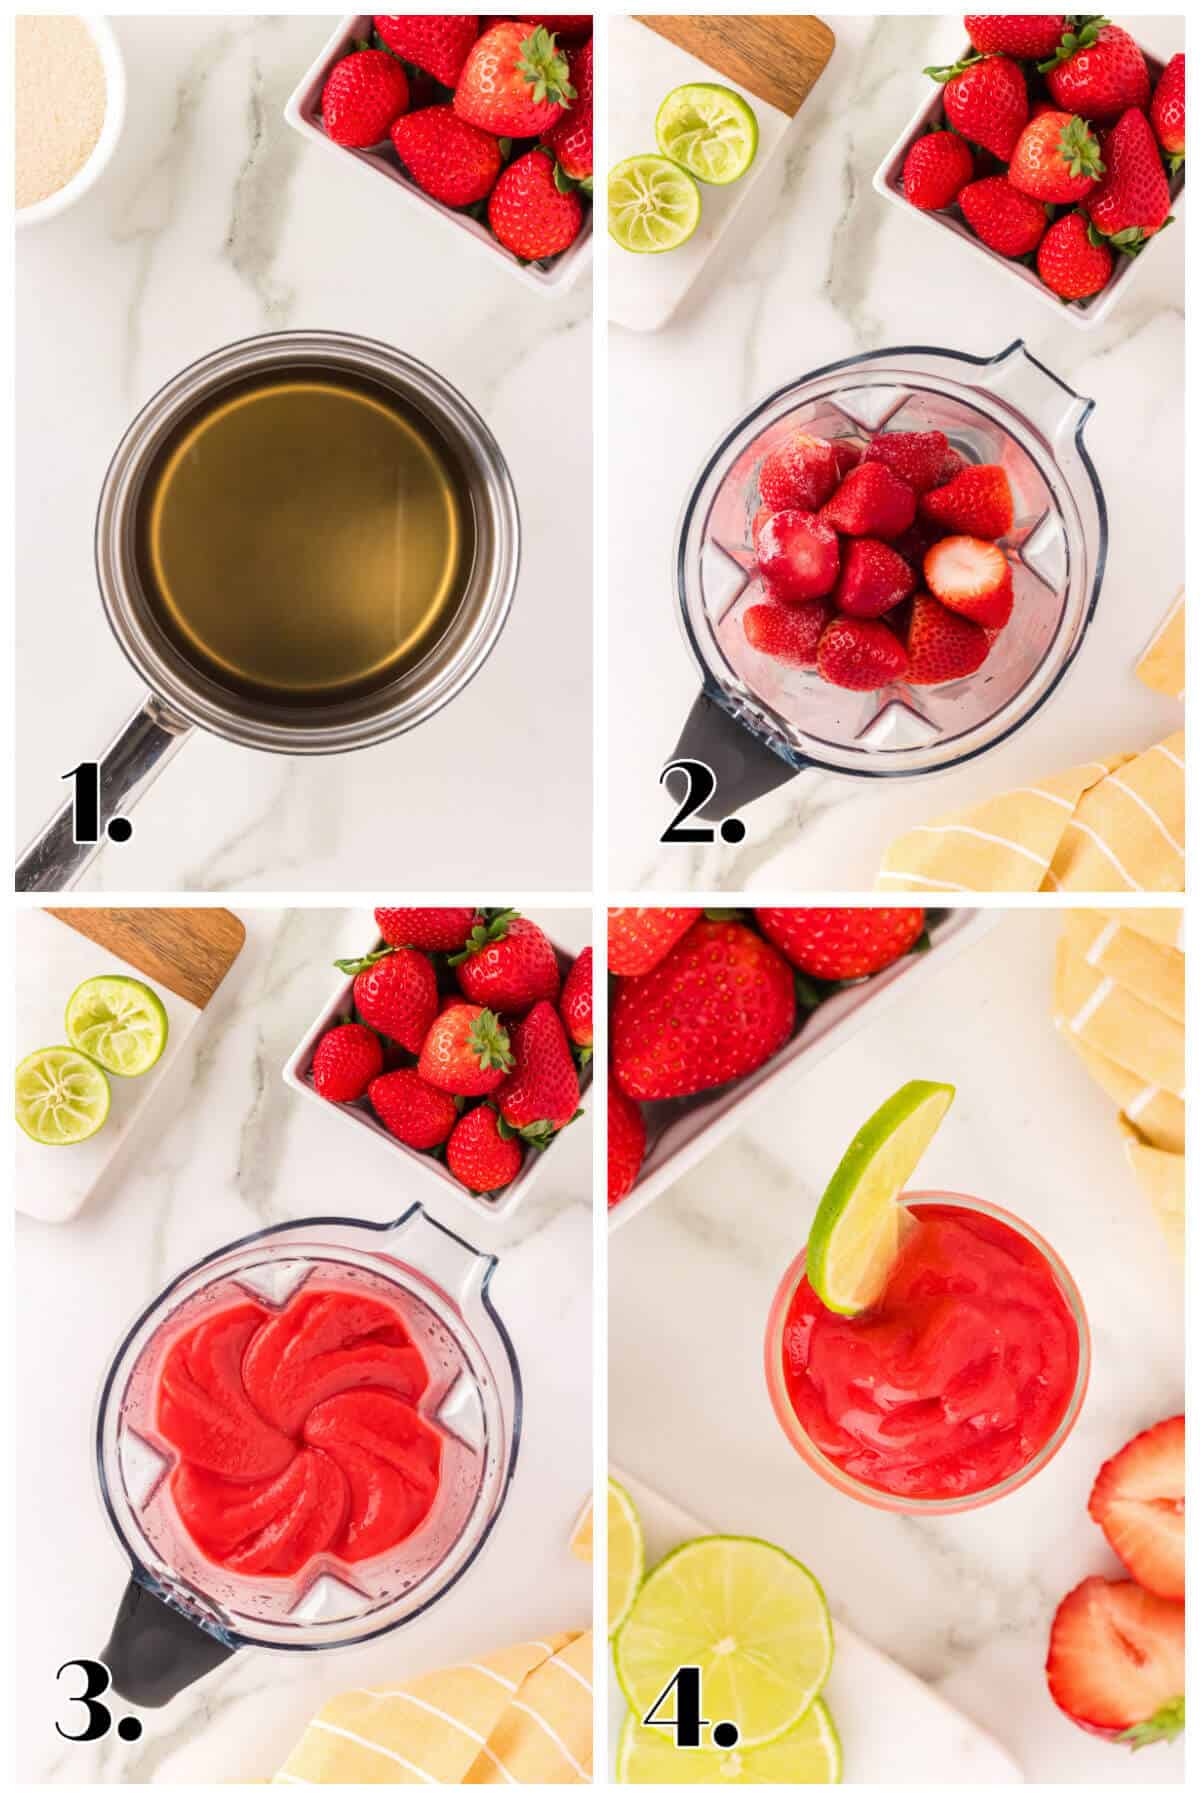 4 image collage with steps to making non-alcoholic strawberry daiquiris. 1. make syrup. 2. put ingredients in blender. 3. blend. 4. pour and garnish.